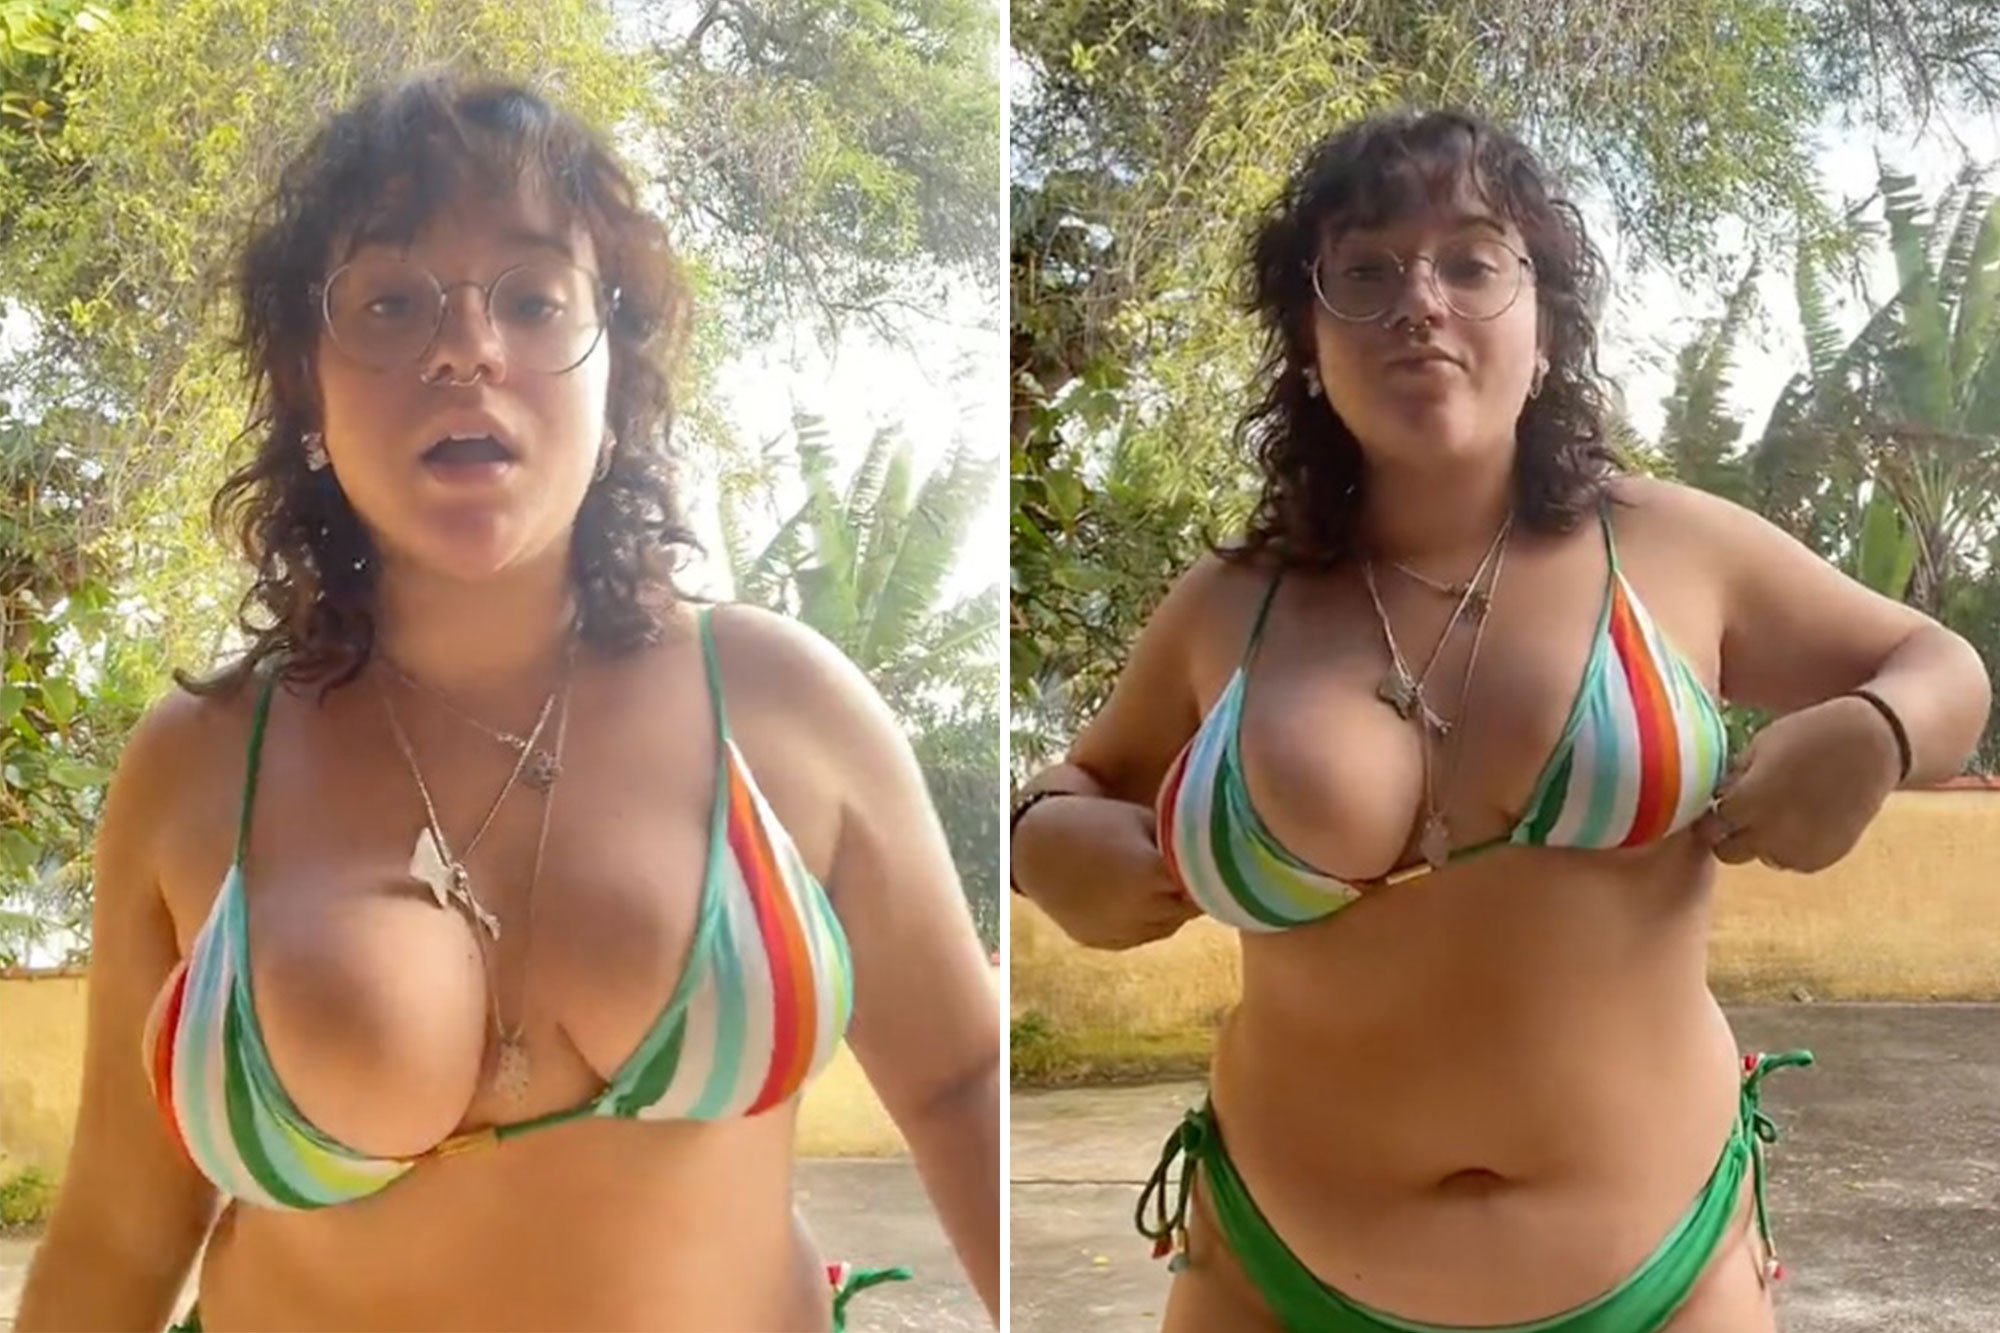 anthony el zakhem recommends chubby girl huge boobs pic